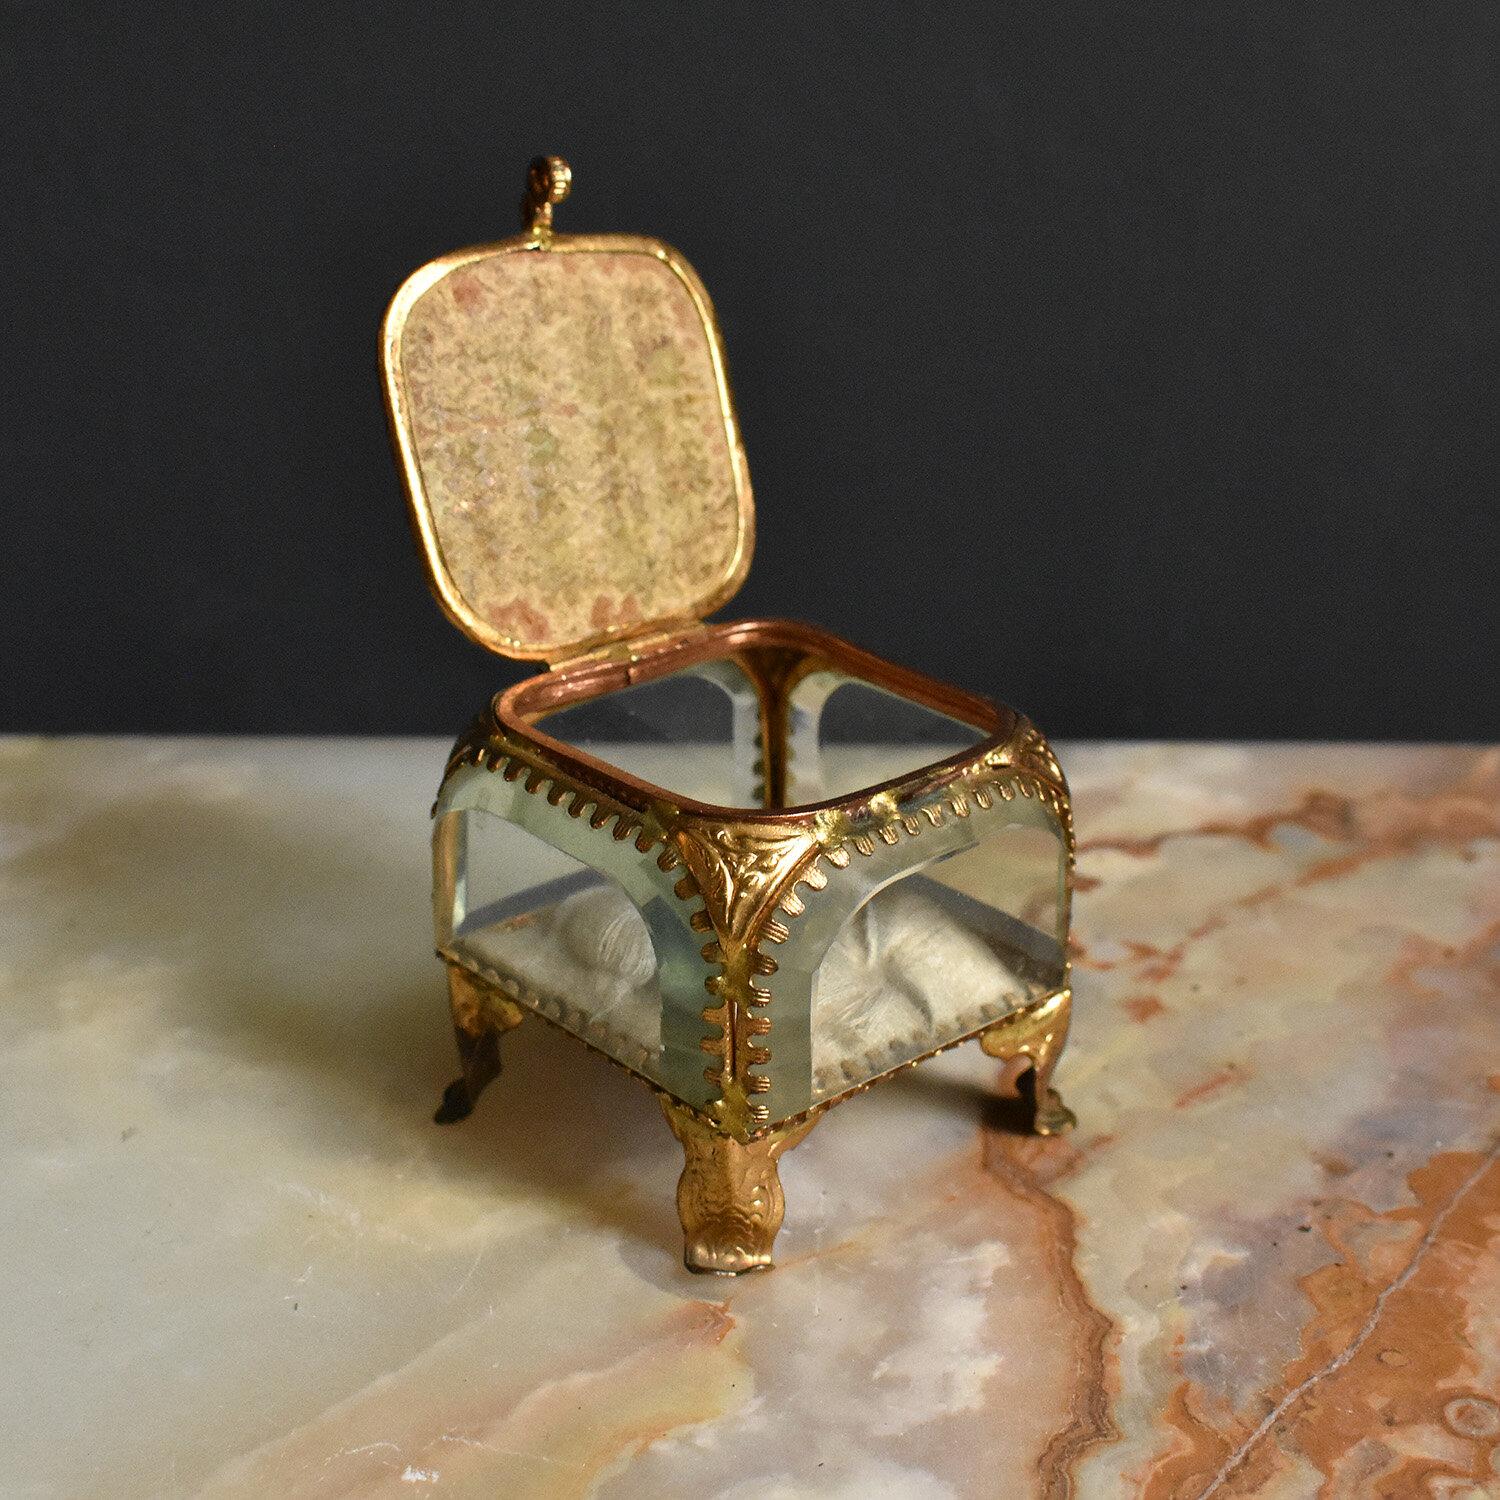 Antique French Gilt Brass and Cut Glass Souvenir Jewellery Casket, 19th Century For Sale 2